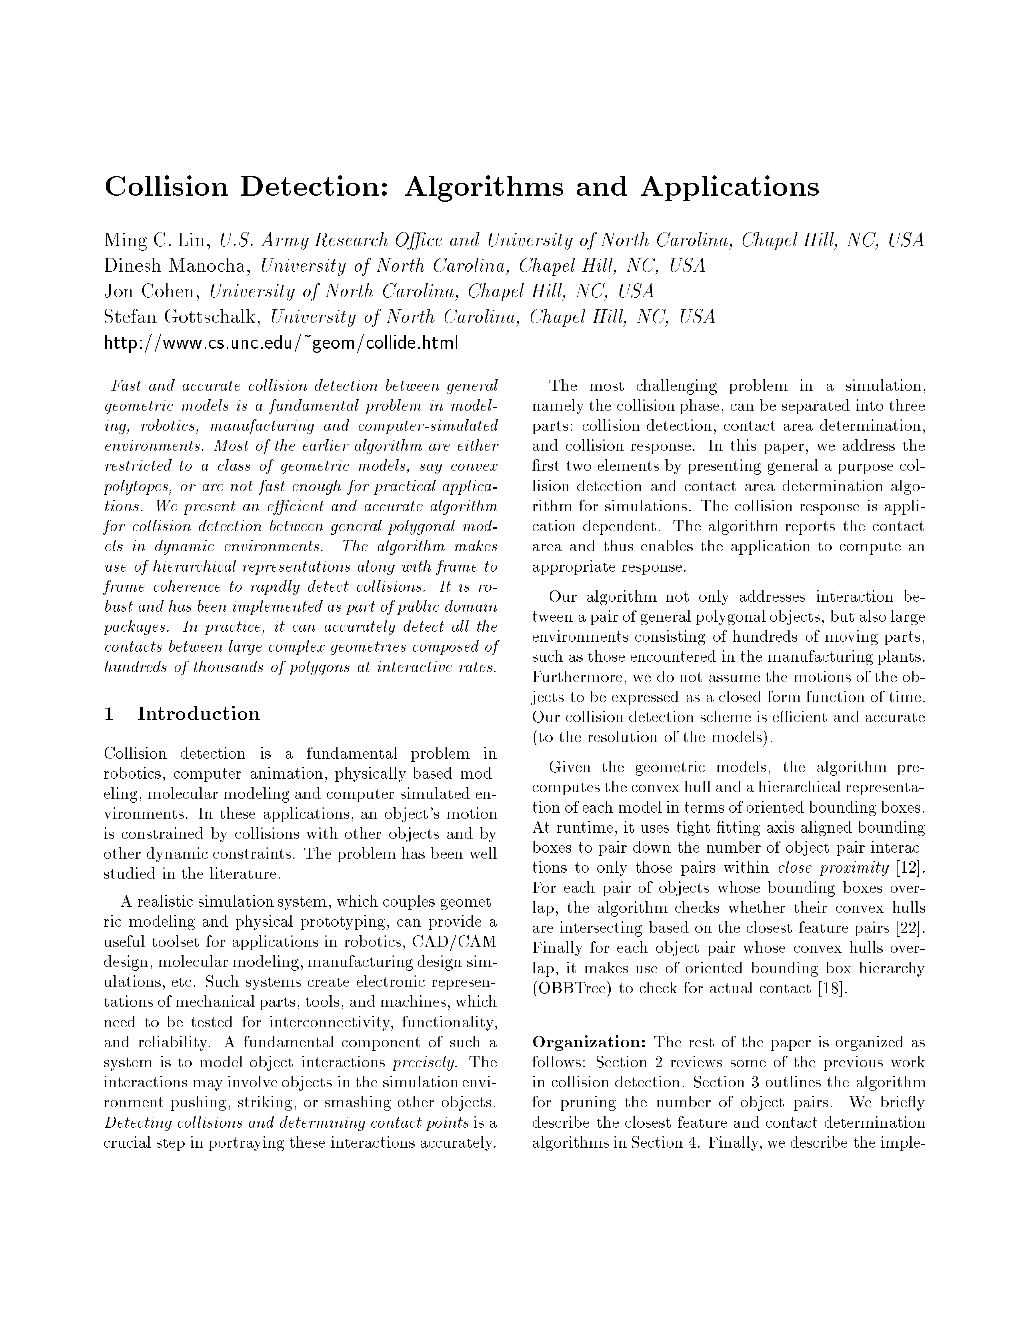 Collision Detection: Algorithms and Applications